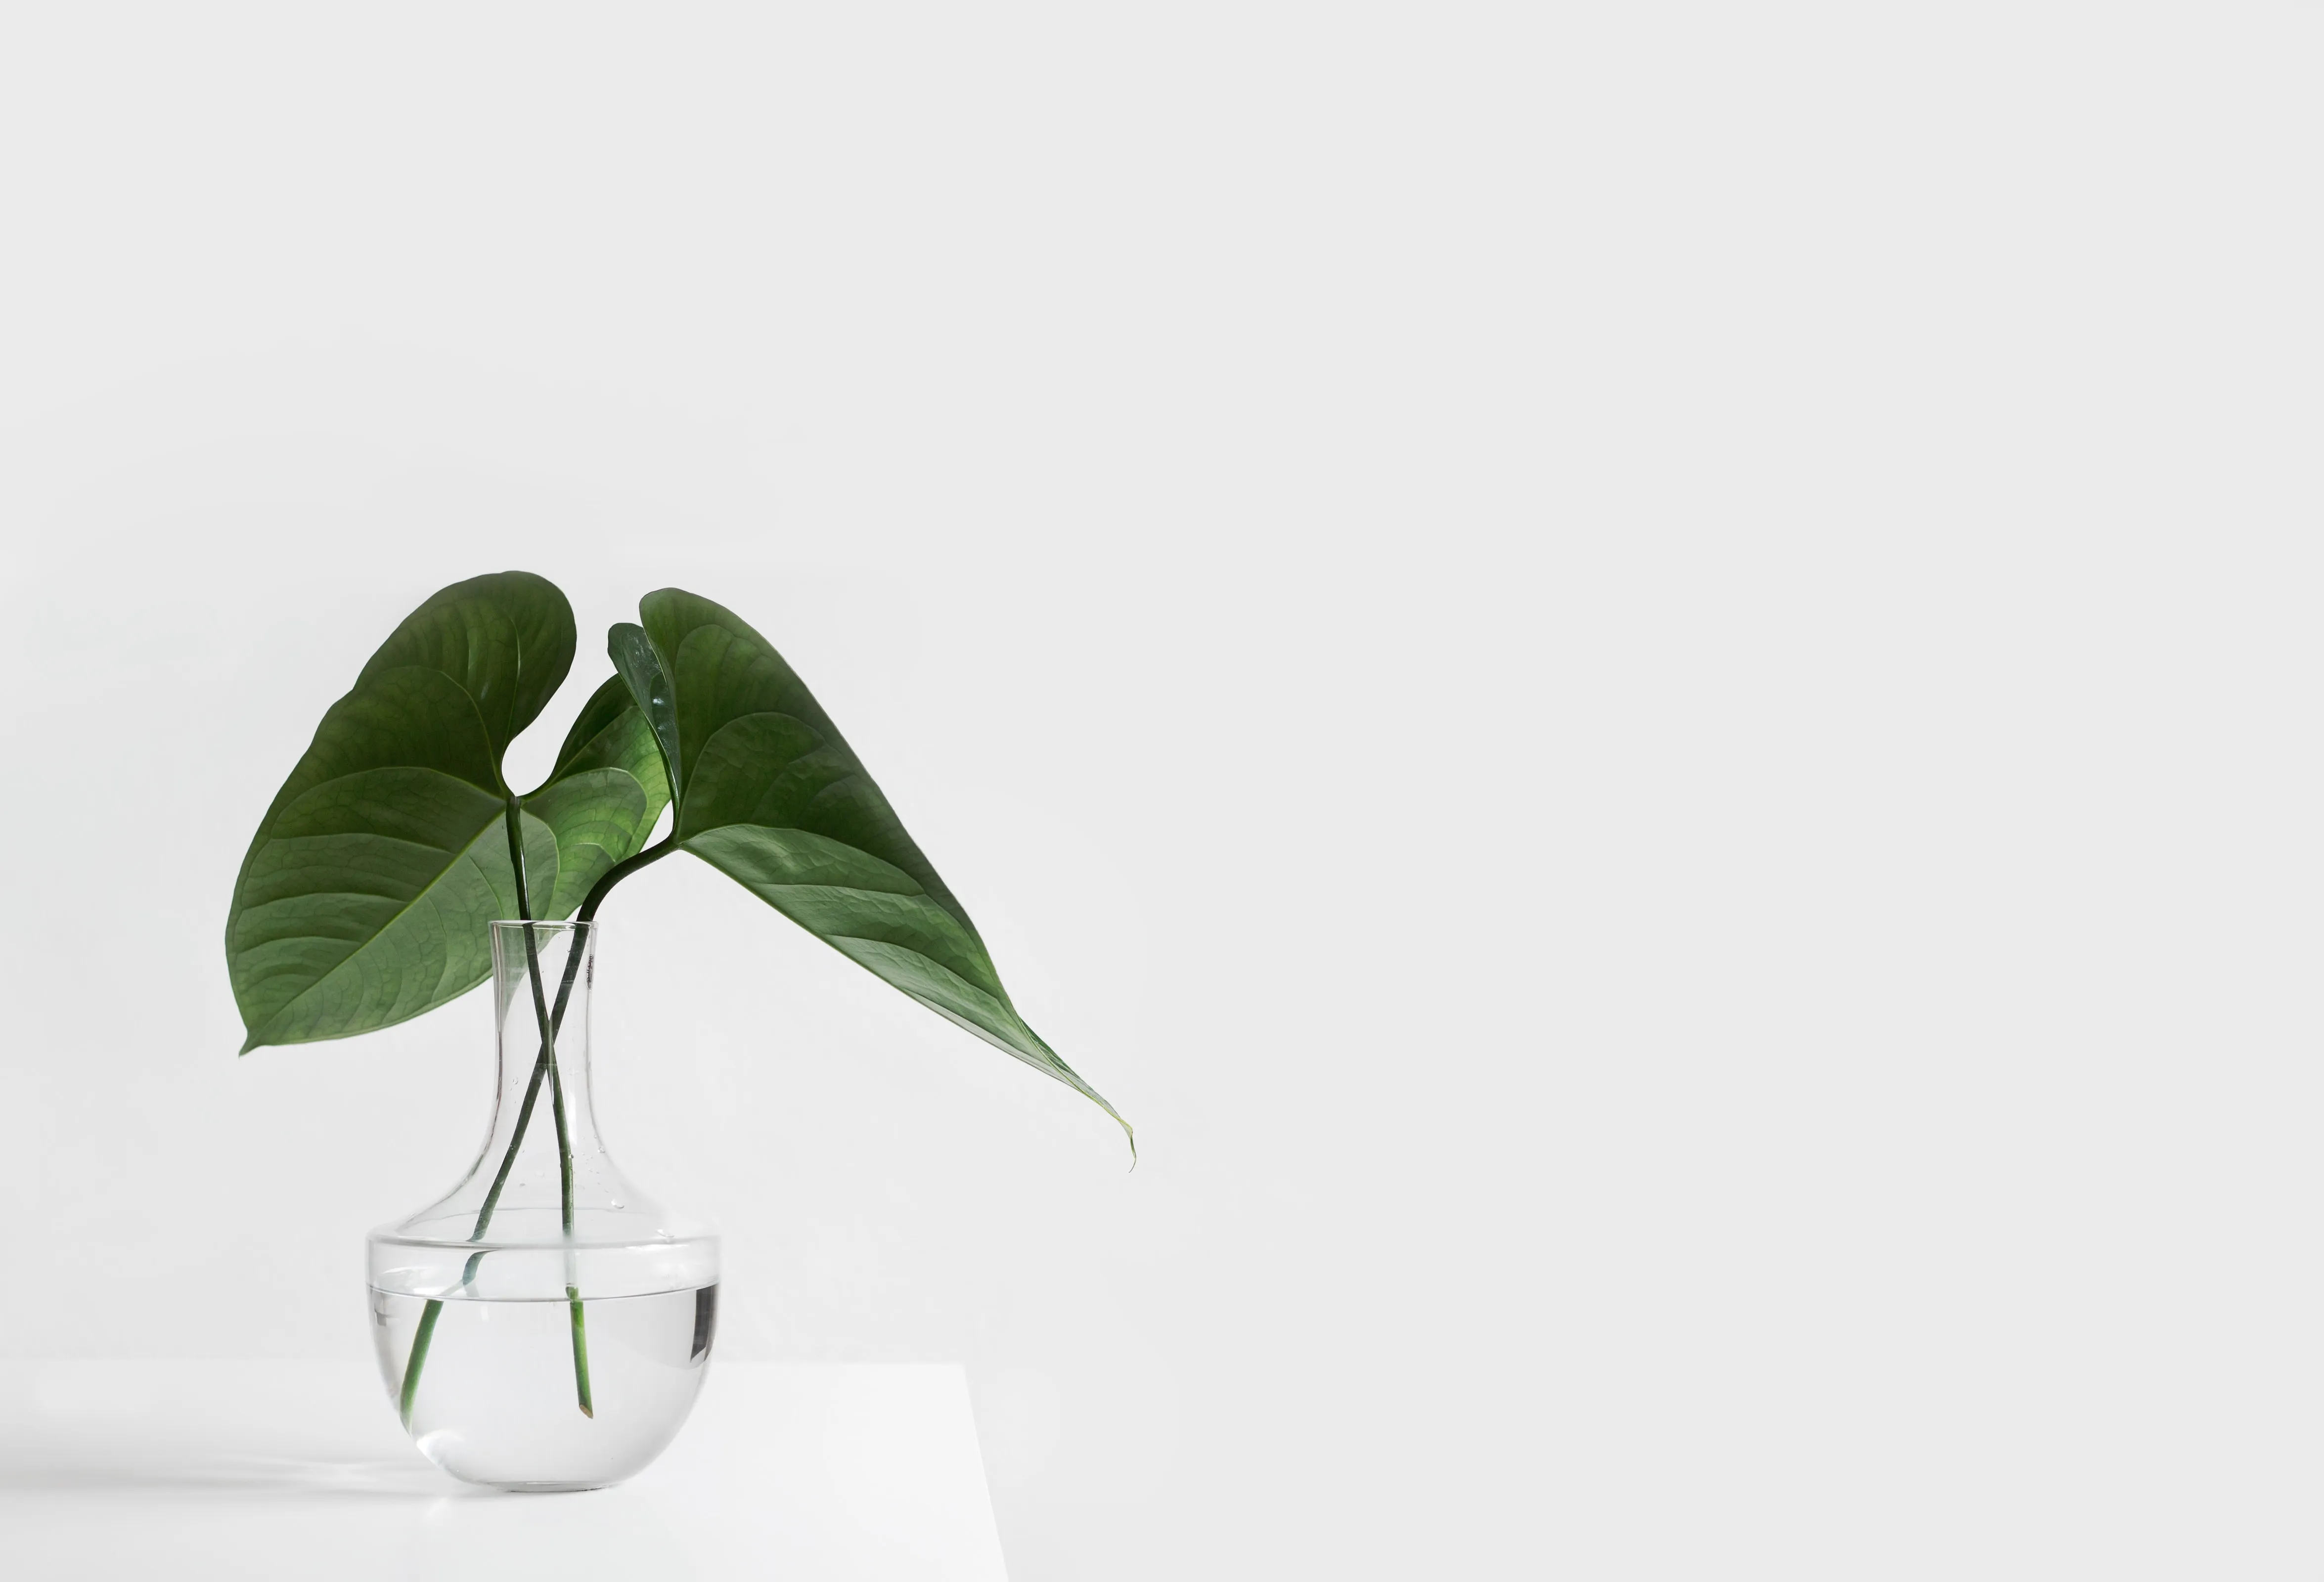 A plant standing on the white background